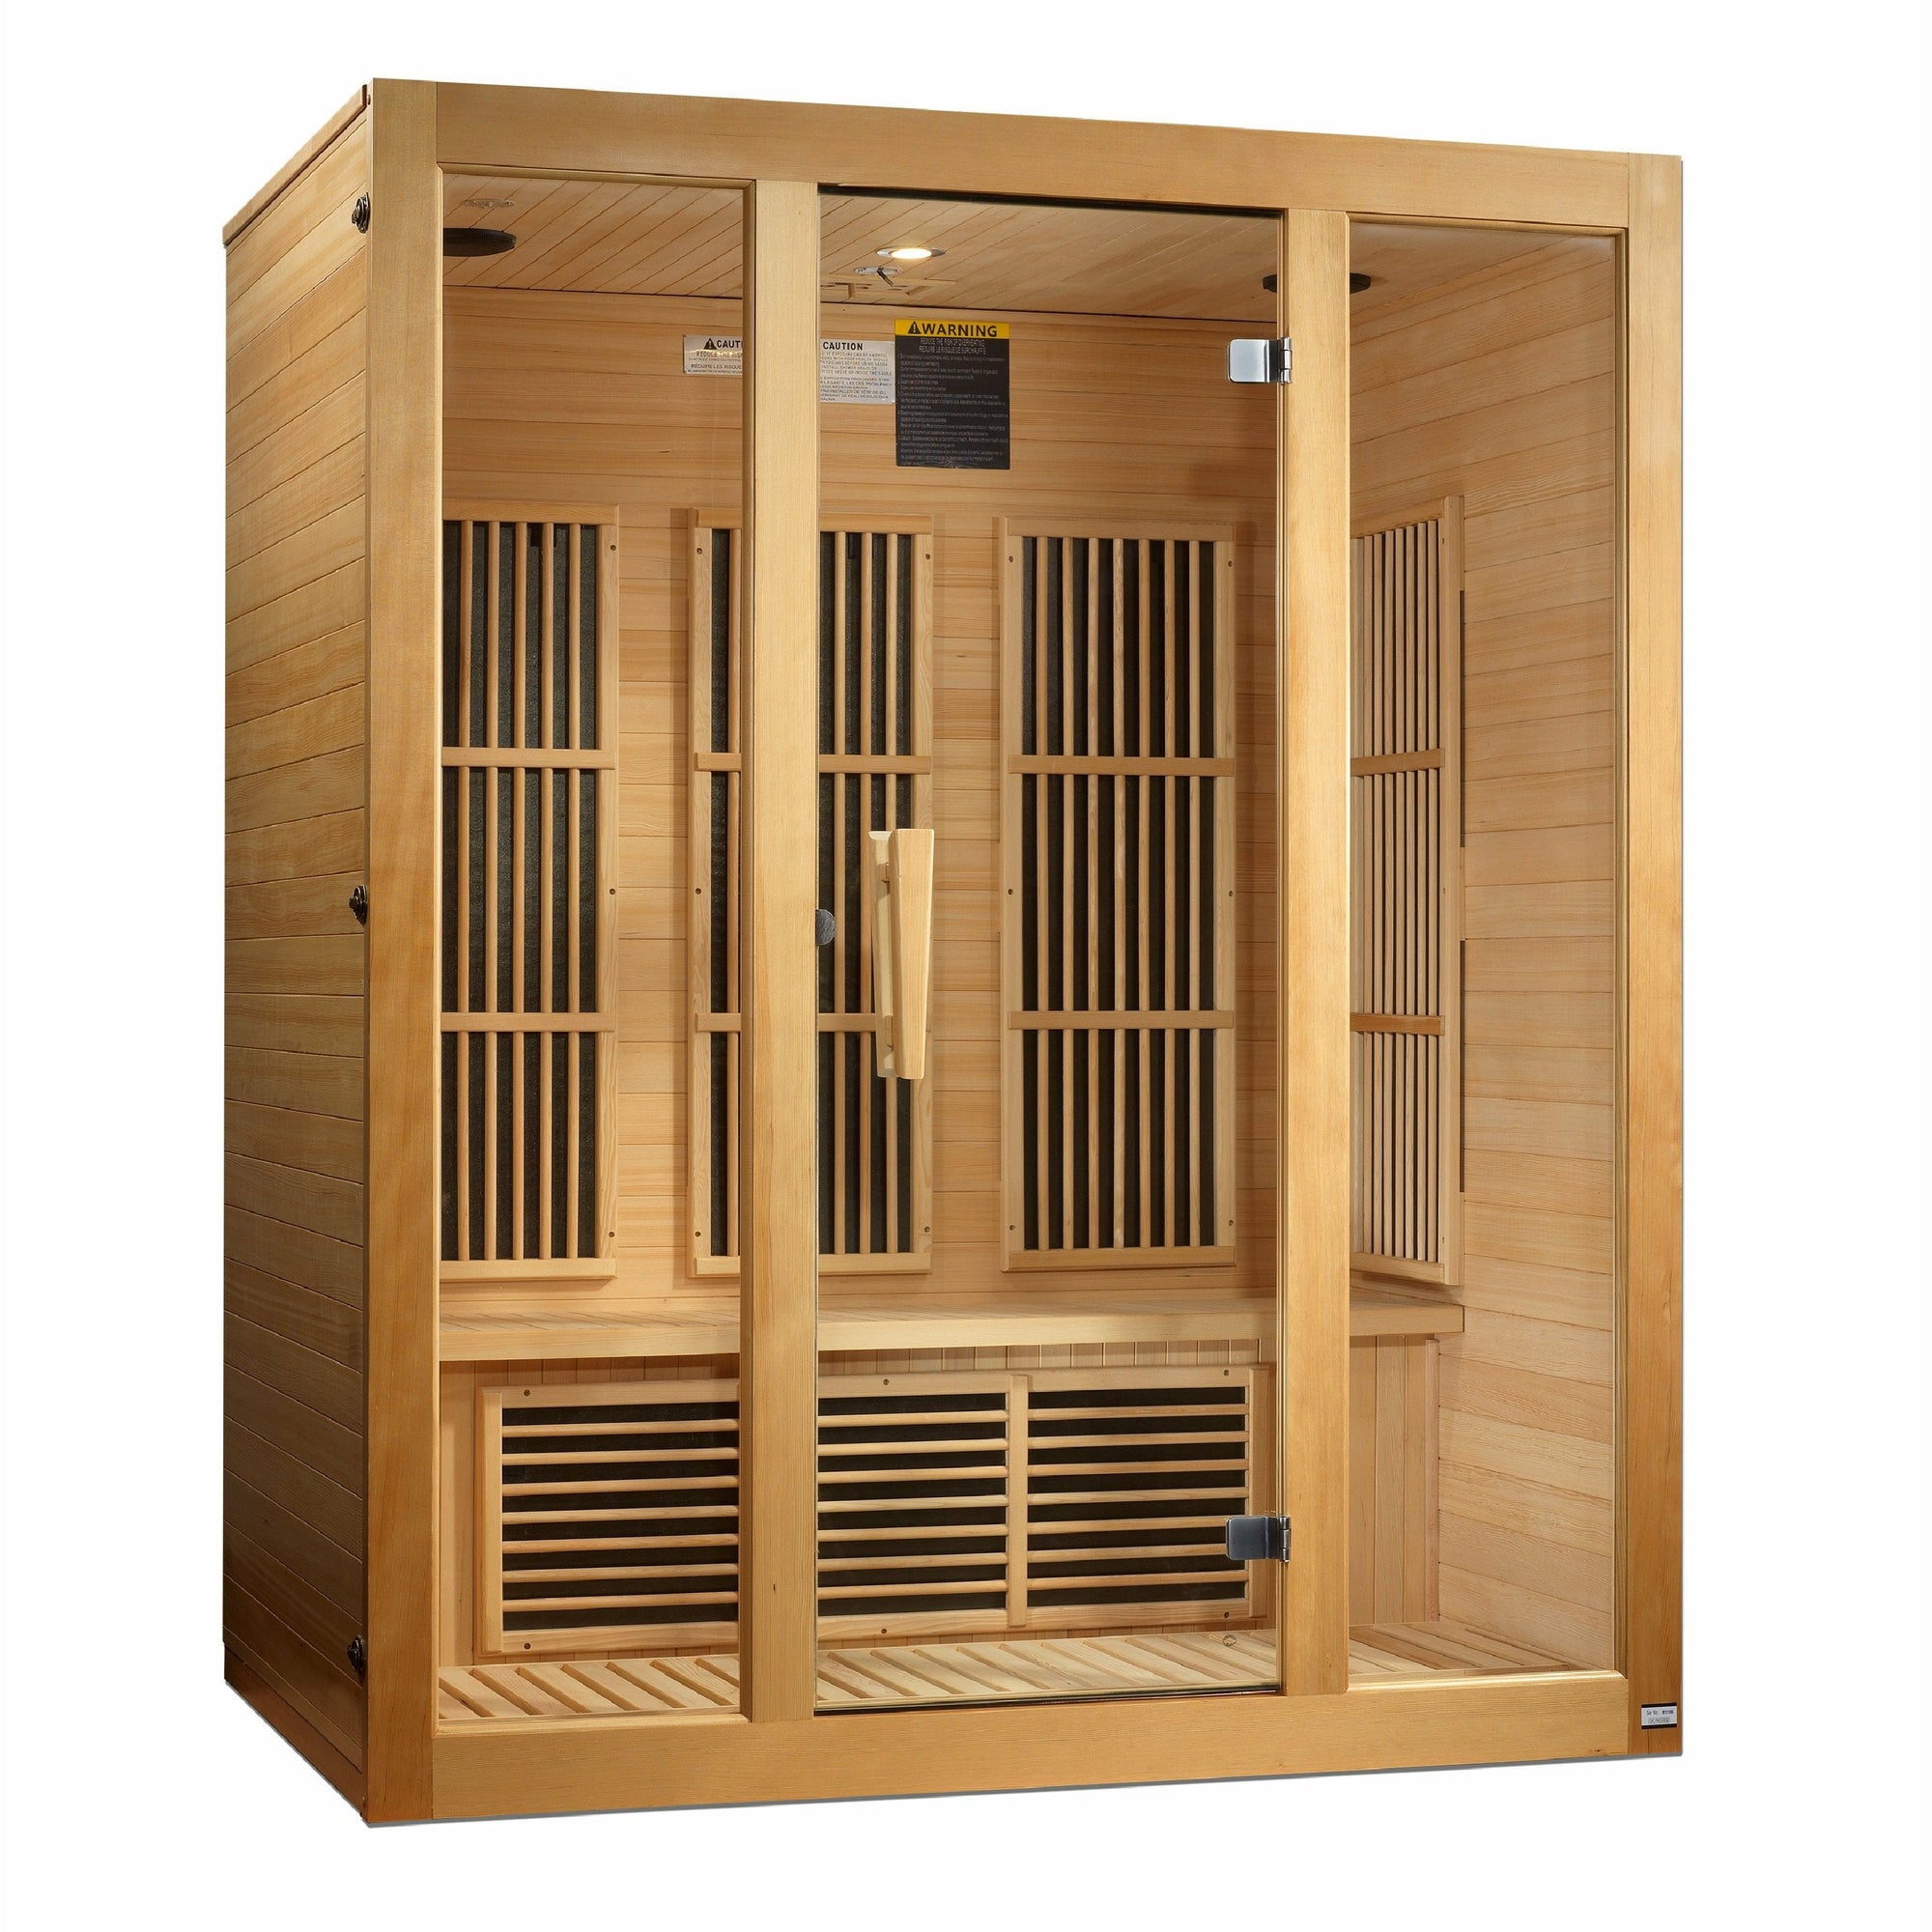 Maxxus Bellevue Low EMF FAR Infrared Sauna - 3 Person Natural hemlock wood construction Roof vent with Tempered glass door and 2 full-length side windows and Interior reading light isometric view in white background